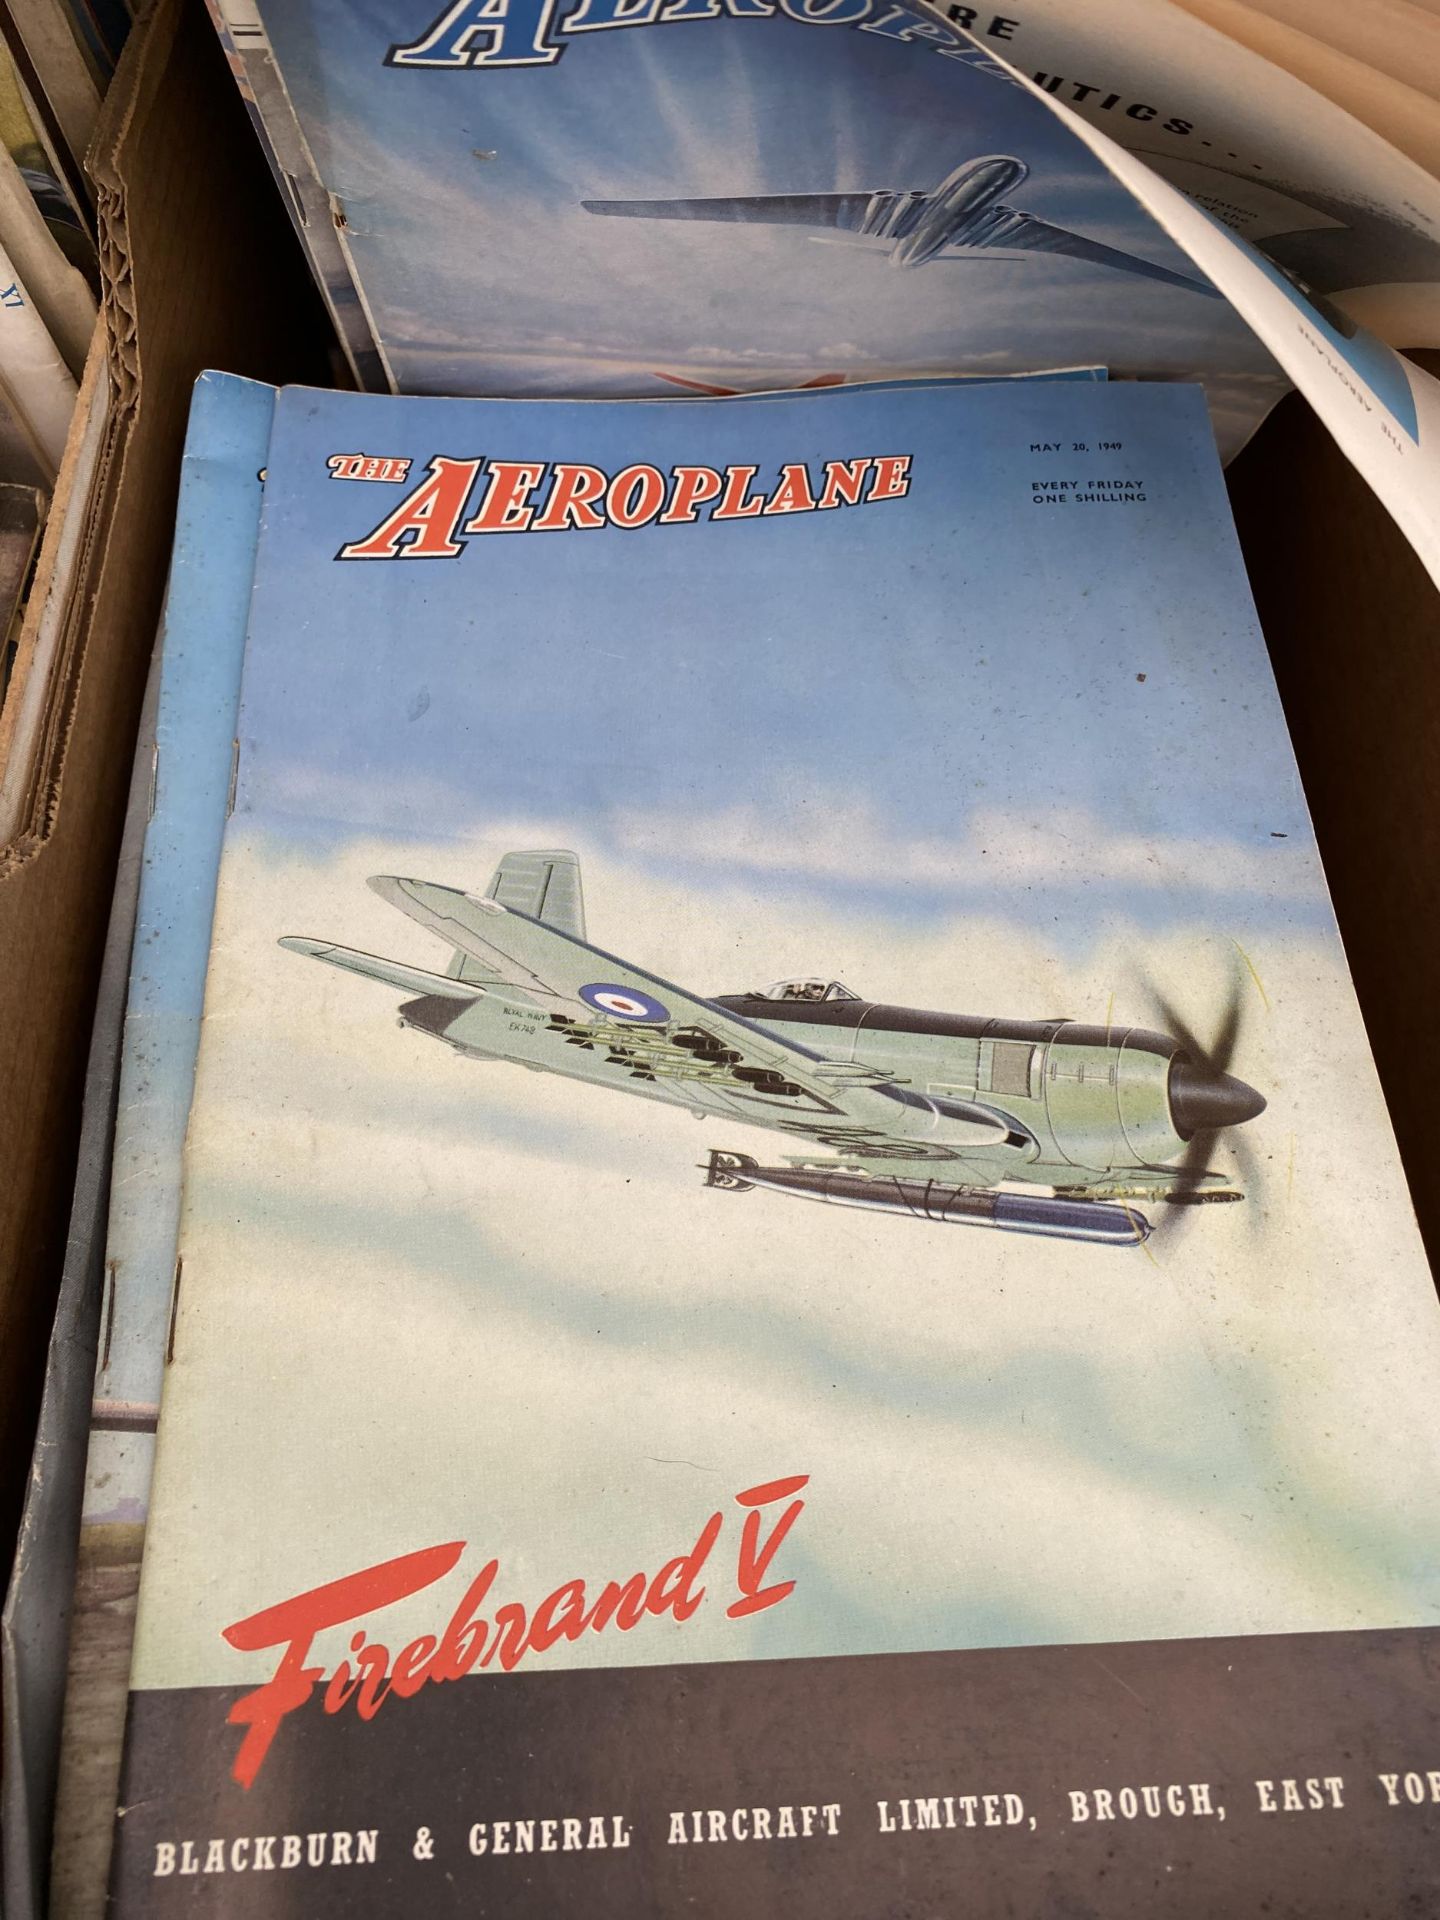 A LARGE ASSORTMENT OF VINTAGE FLIGHT AND AREOPLANE MAGAZINES FROM THE 1940'S AND 1950'S - Bild 4 aus 4